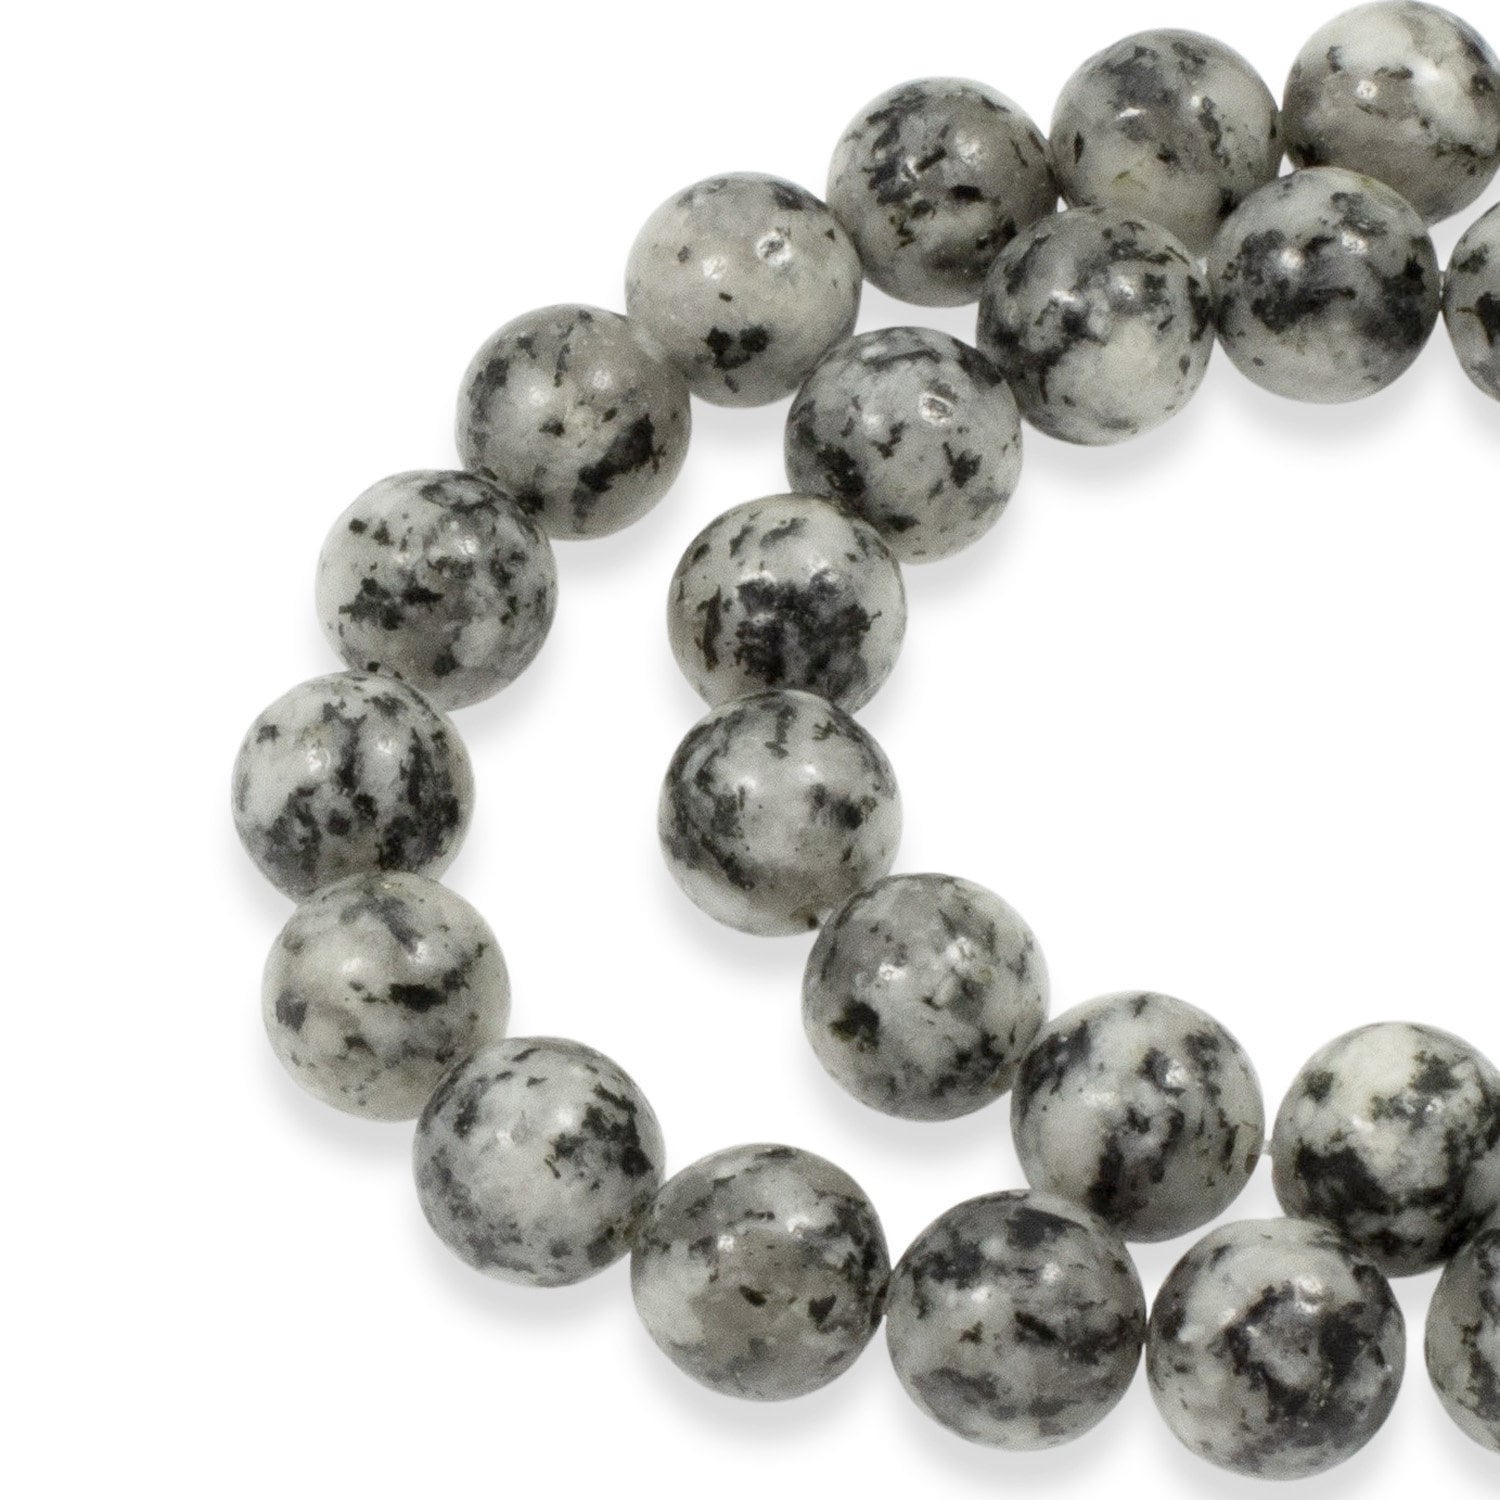 Tibetan Faceted Agate Beads, DZI Agate Black and Pearly White Color Beads  BS #155, sizes 10 mm 14.5 inch FULL Strands